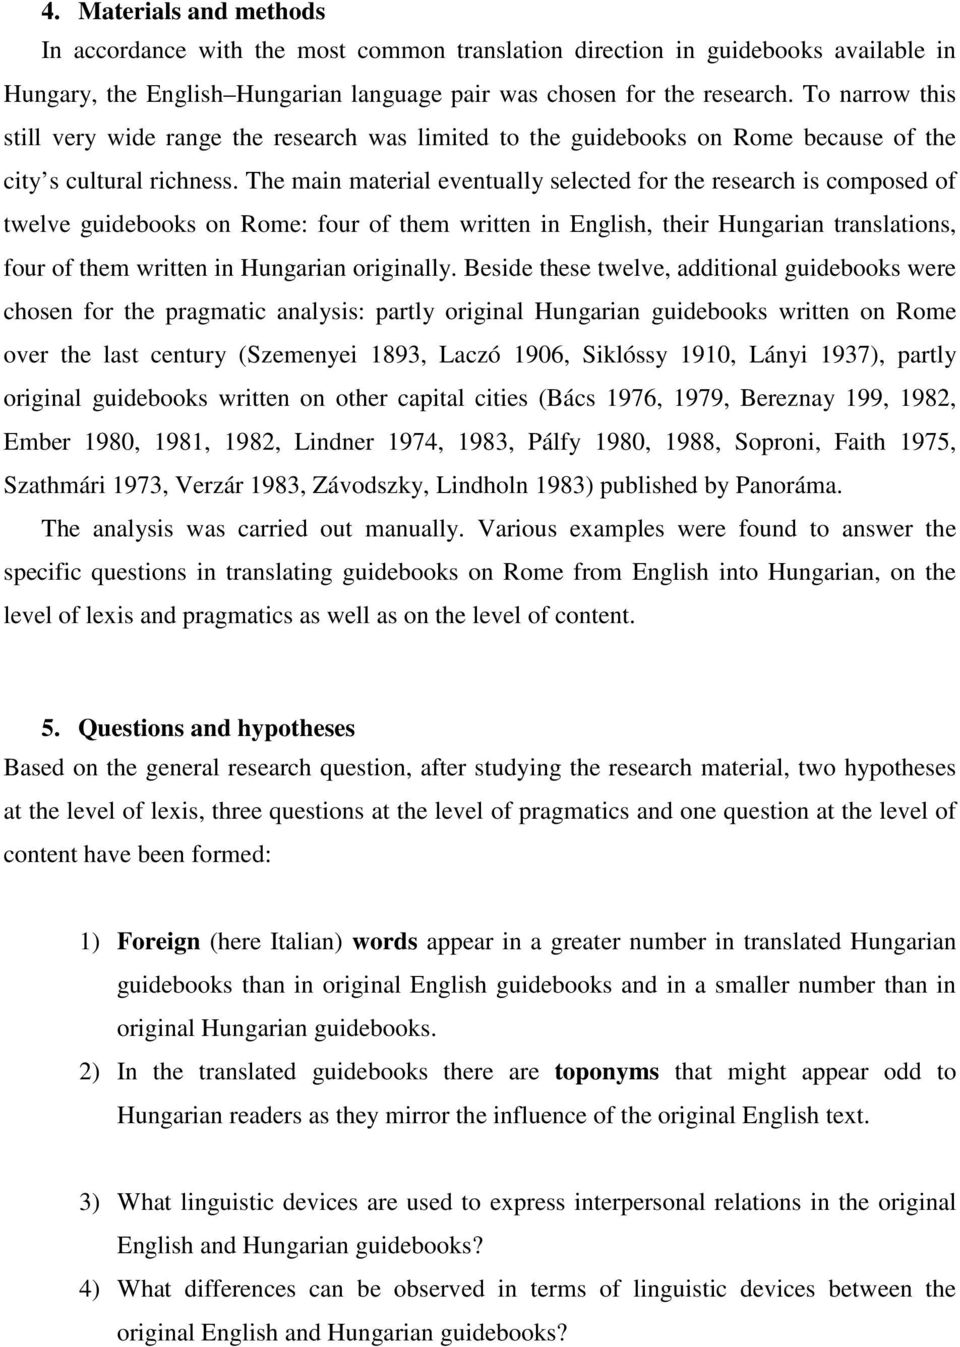 The main material eventually selected for the research is composed of twelve guidebooks on Rome: four of them written in English, their Hungarian translations, four of them written in Hungarian